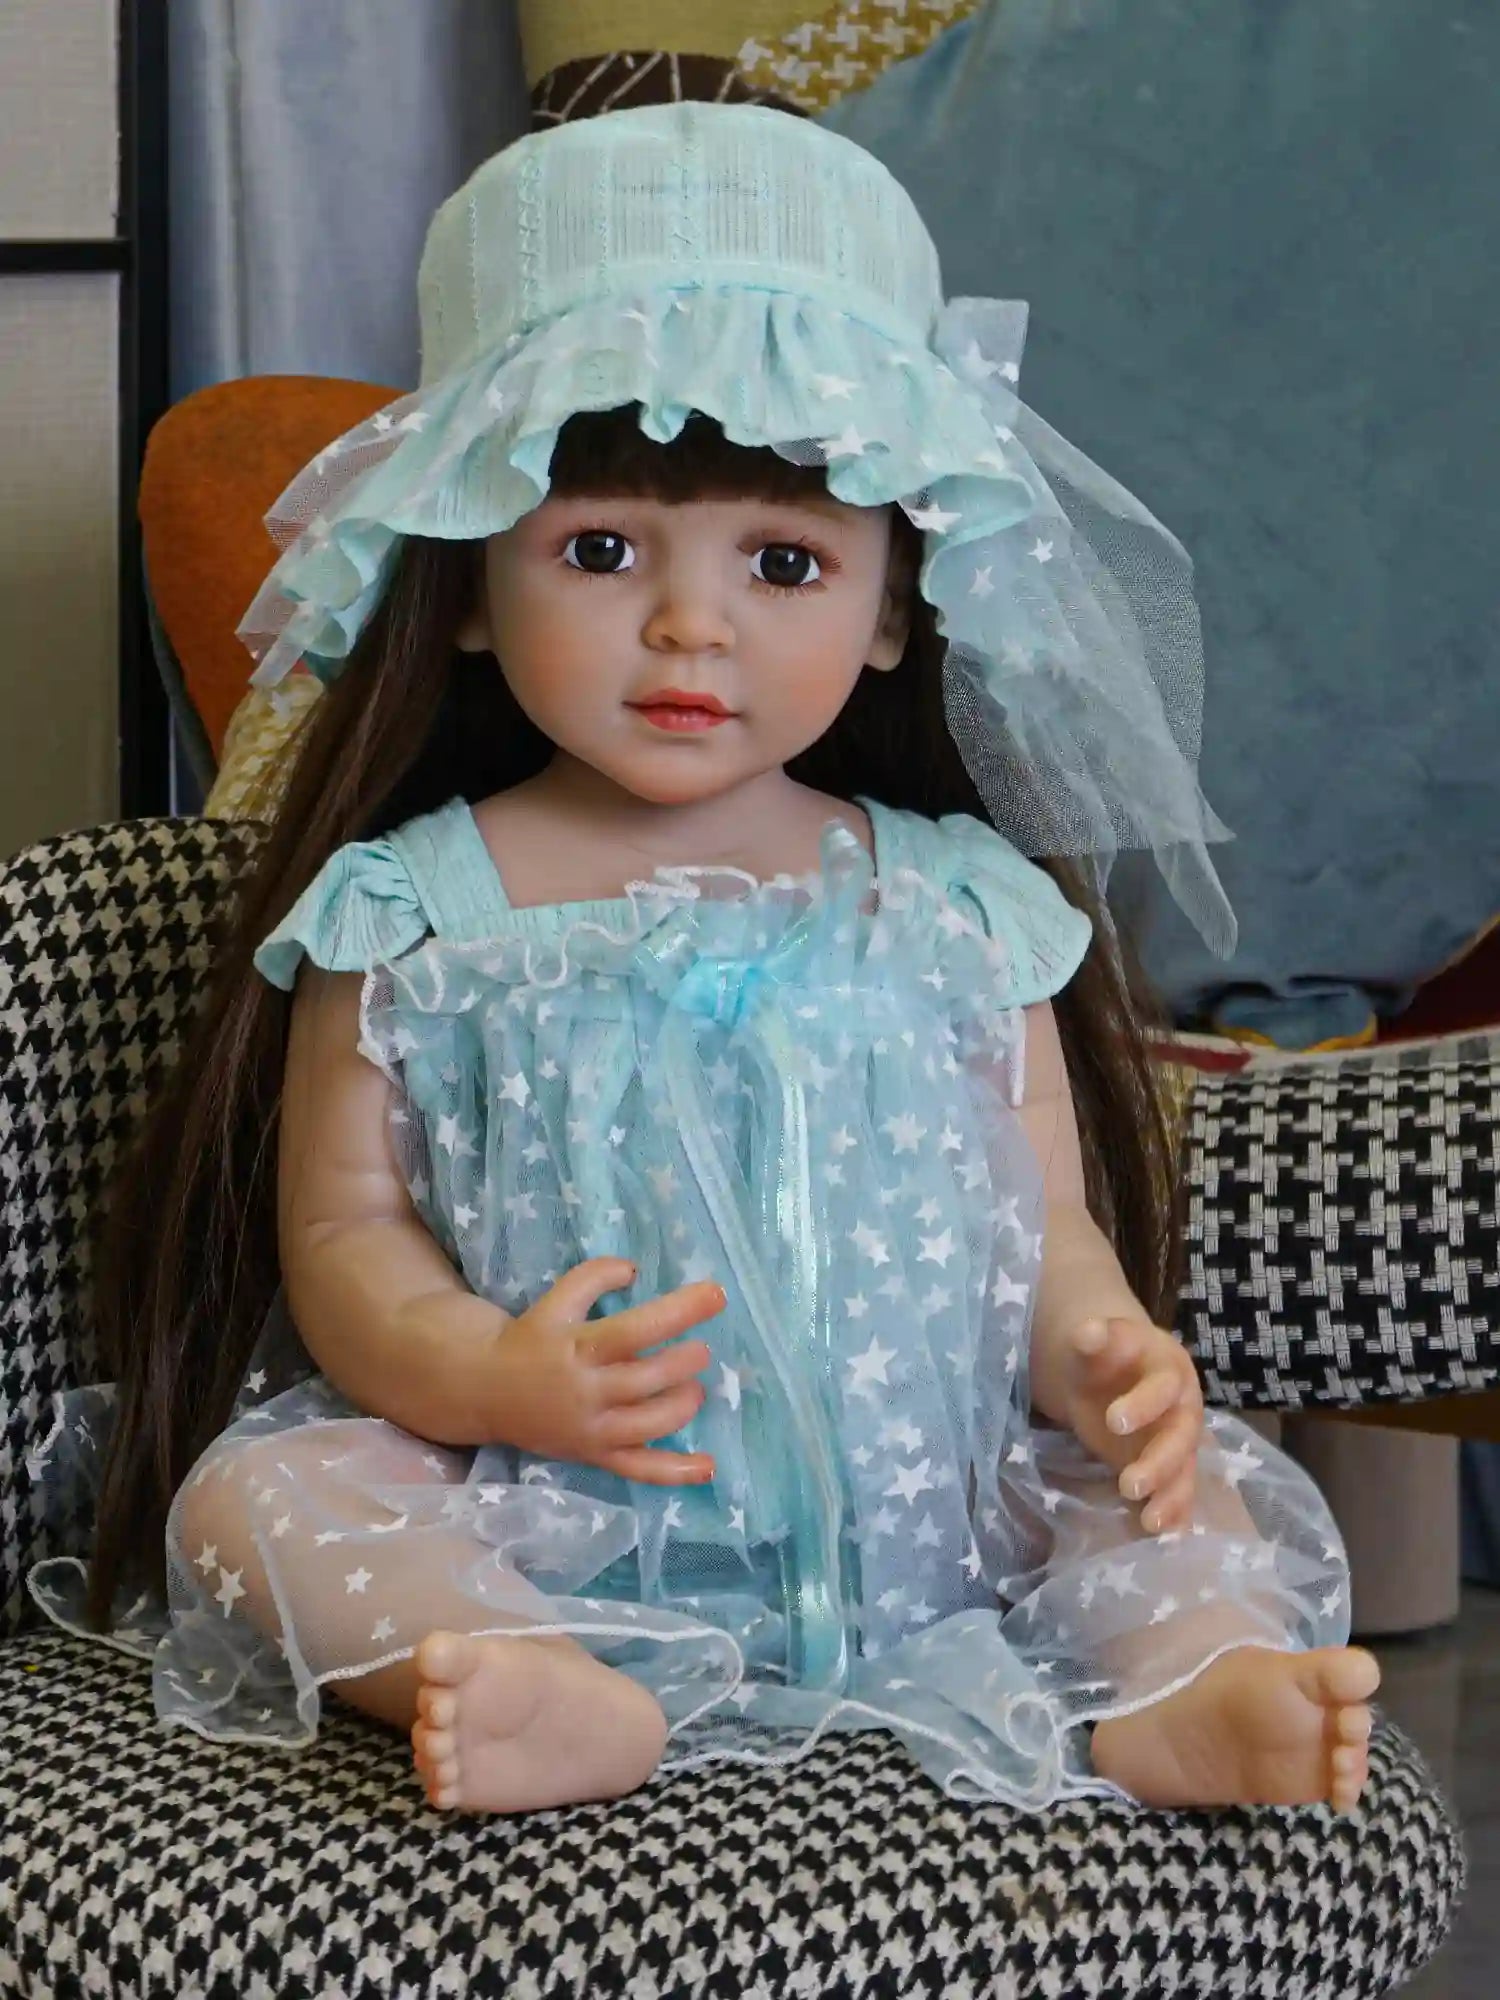 Artisan doll in a delicate blue dress with a bonnet, seated comfortably on a chair.